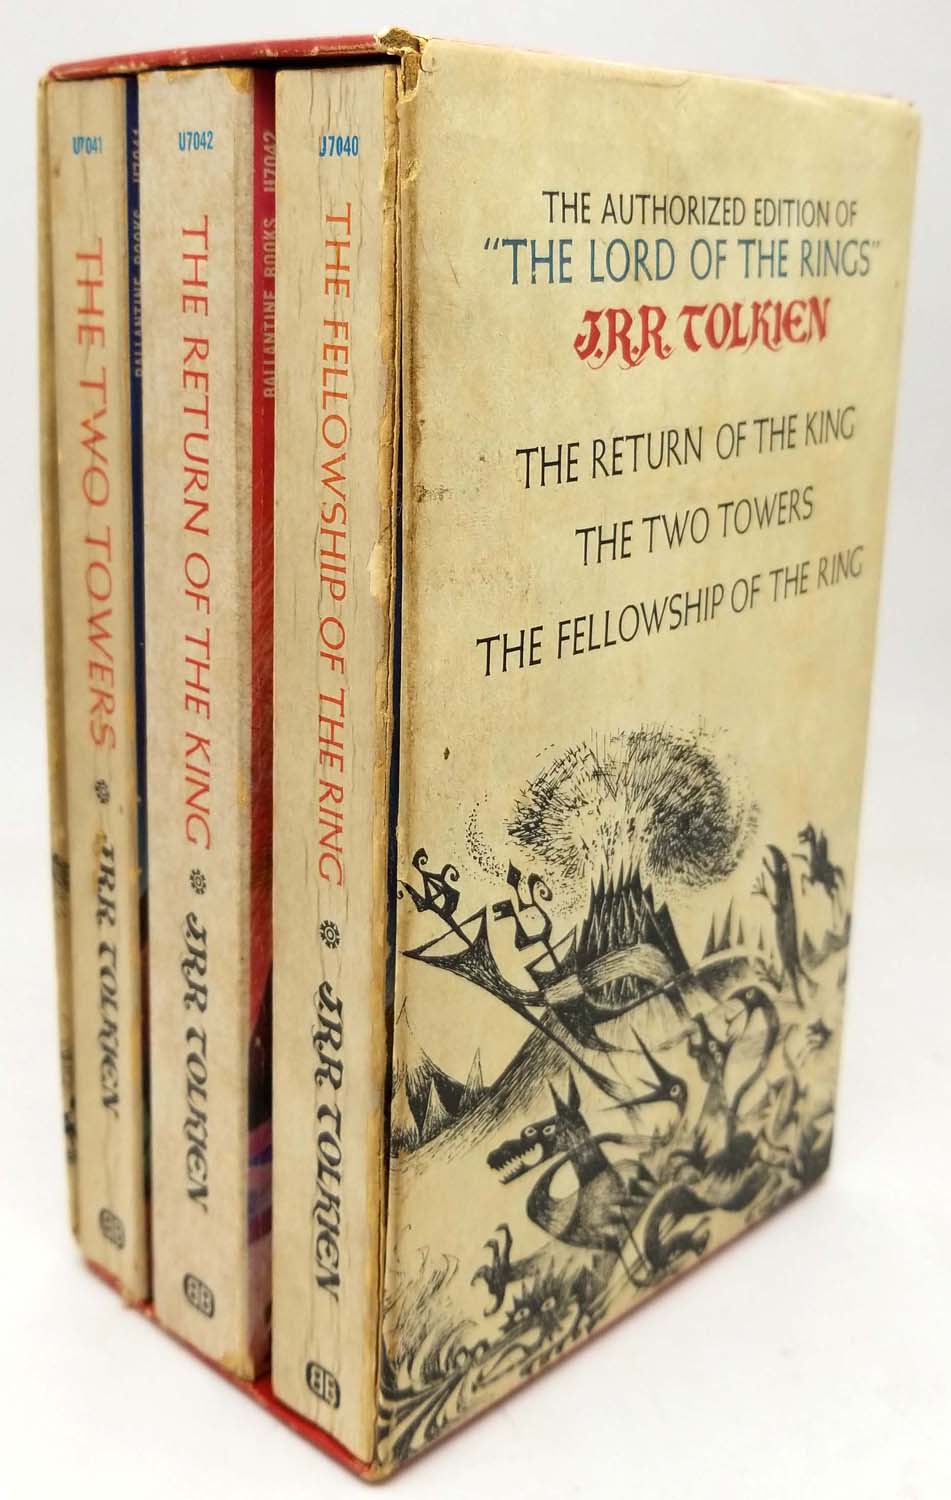 The Lord of the Rings 3-Book Paperback Box Set|Paperback